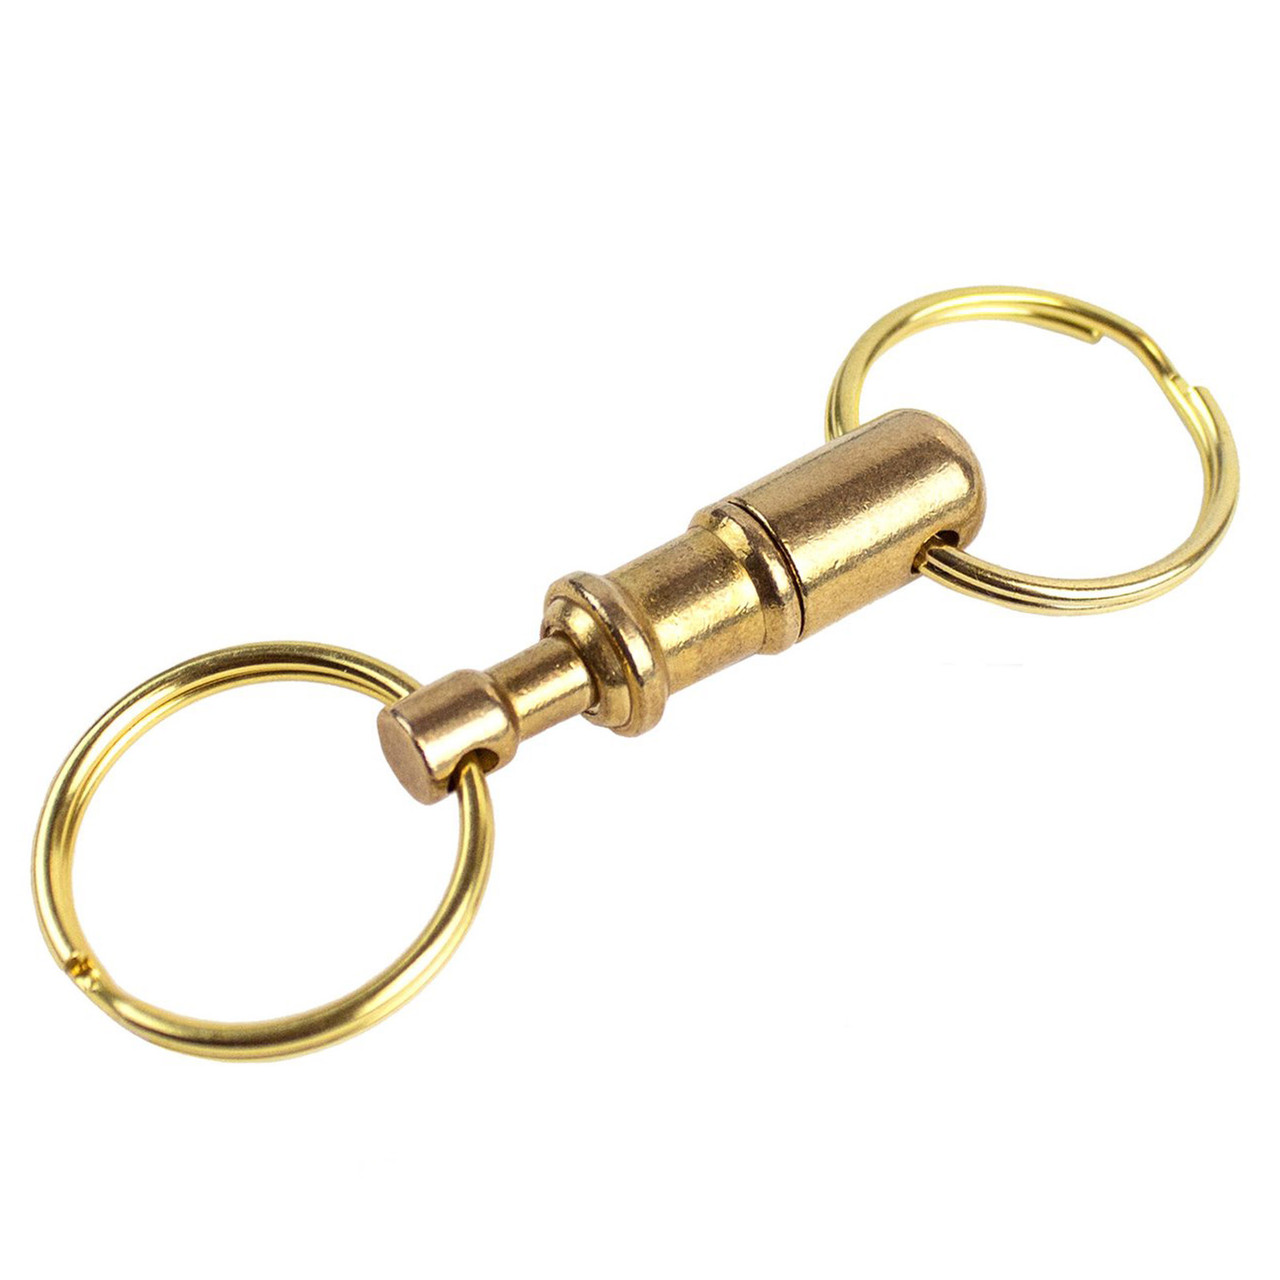 Shop for and Buy Brass Pull Apart Keychain Ball Bearing Release at .  Large selection and bulk discounts available.